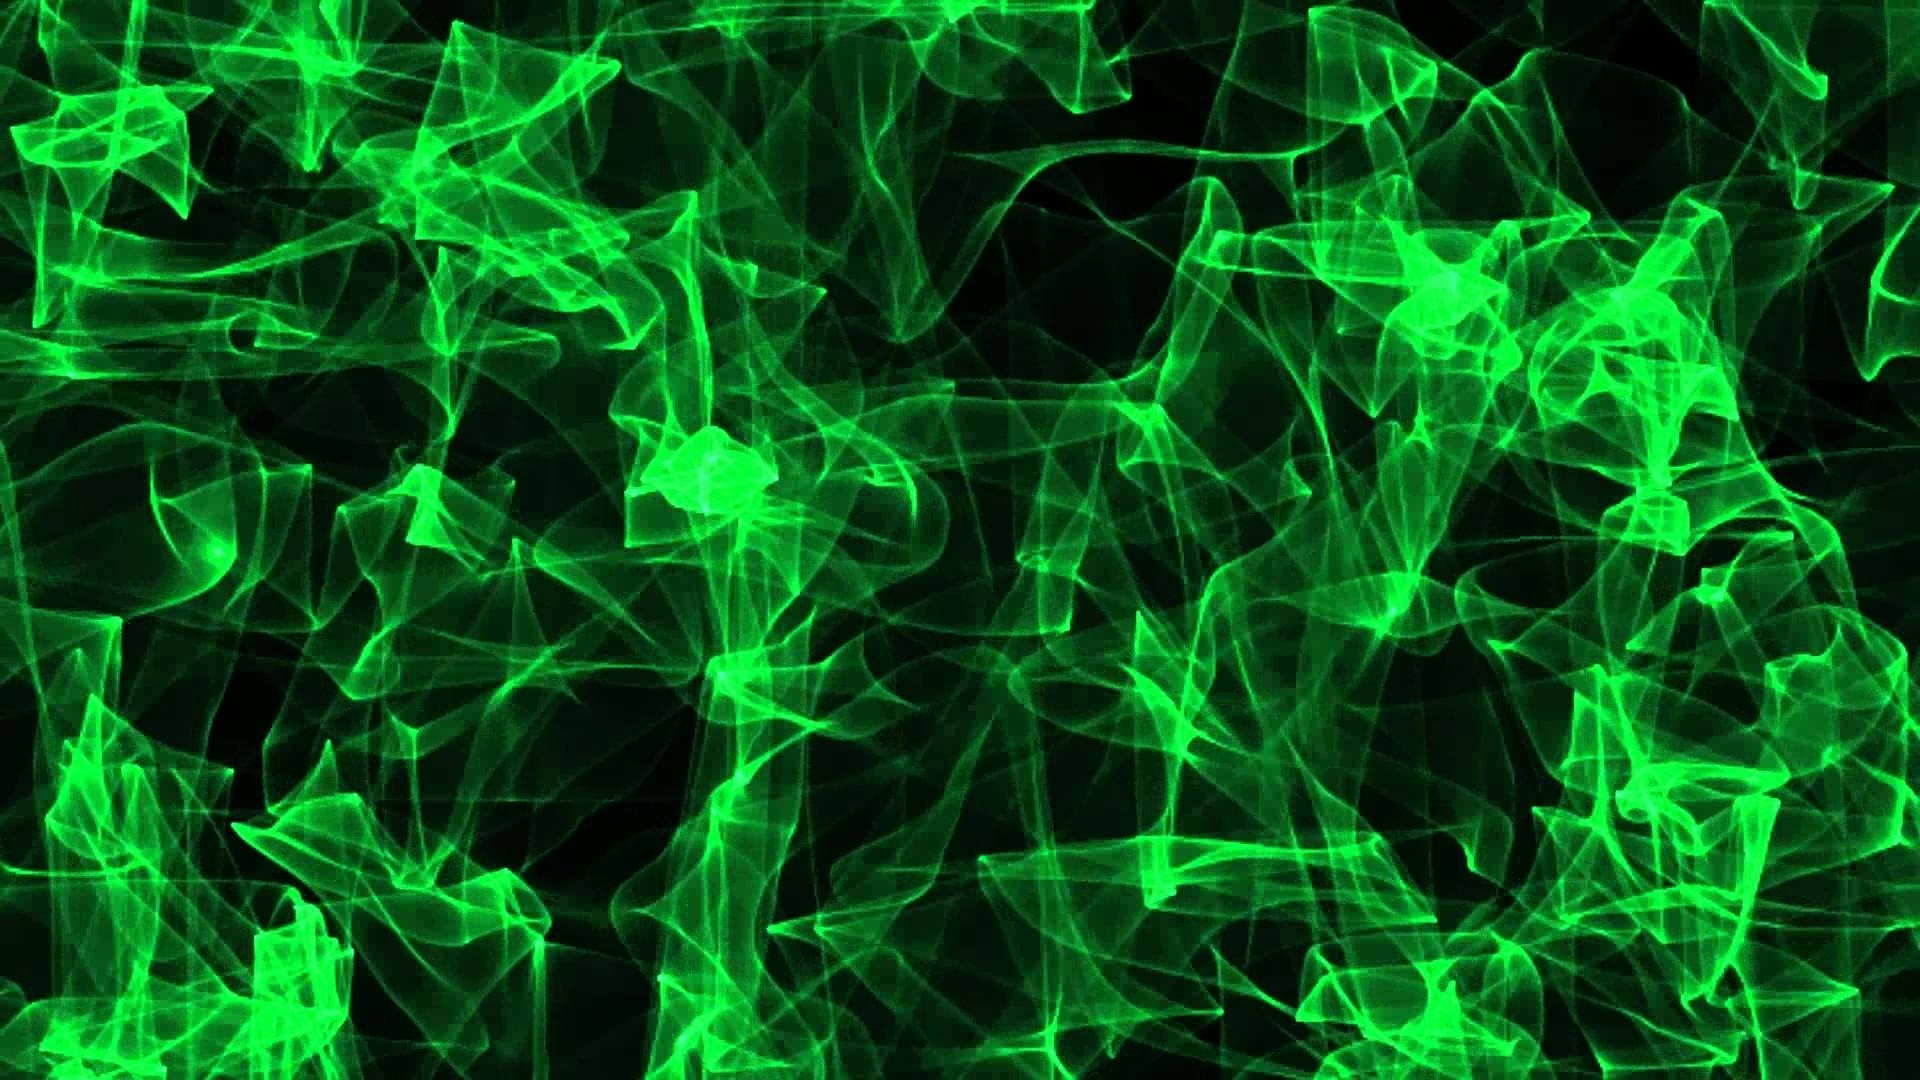 1920x1080 Title : green background texture free footage hd abstract on black.  Dimension : 1920 x 1080. File Type : JPG/JPEG